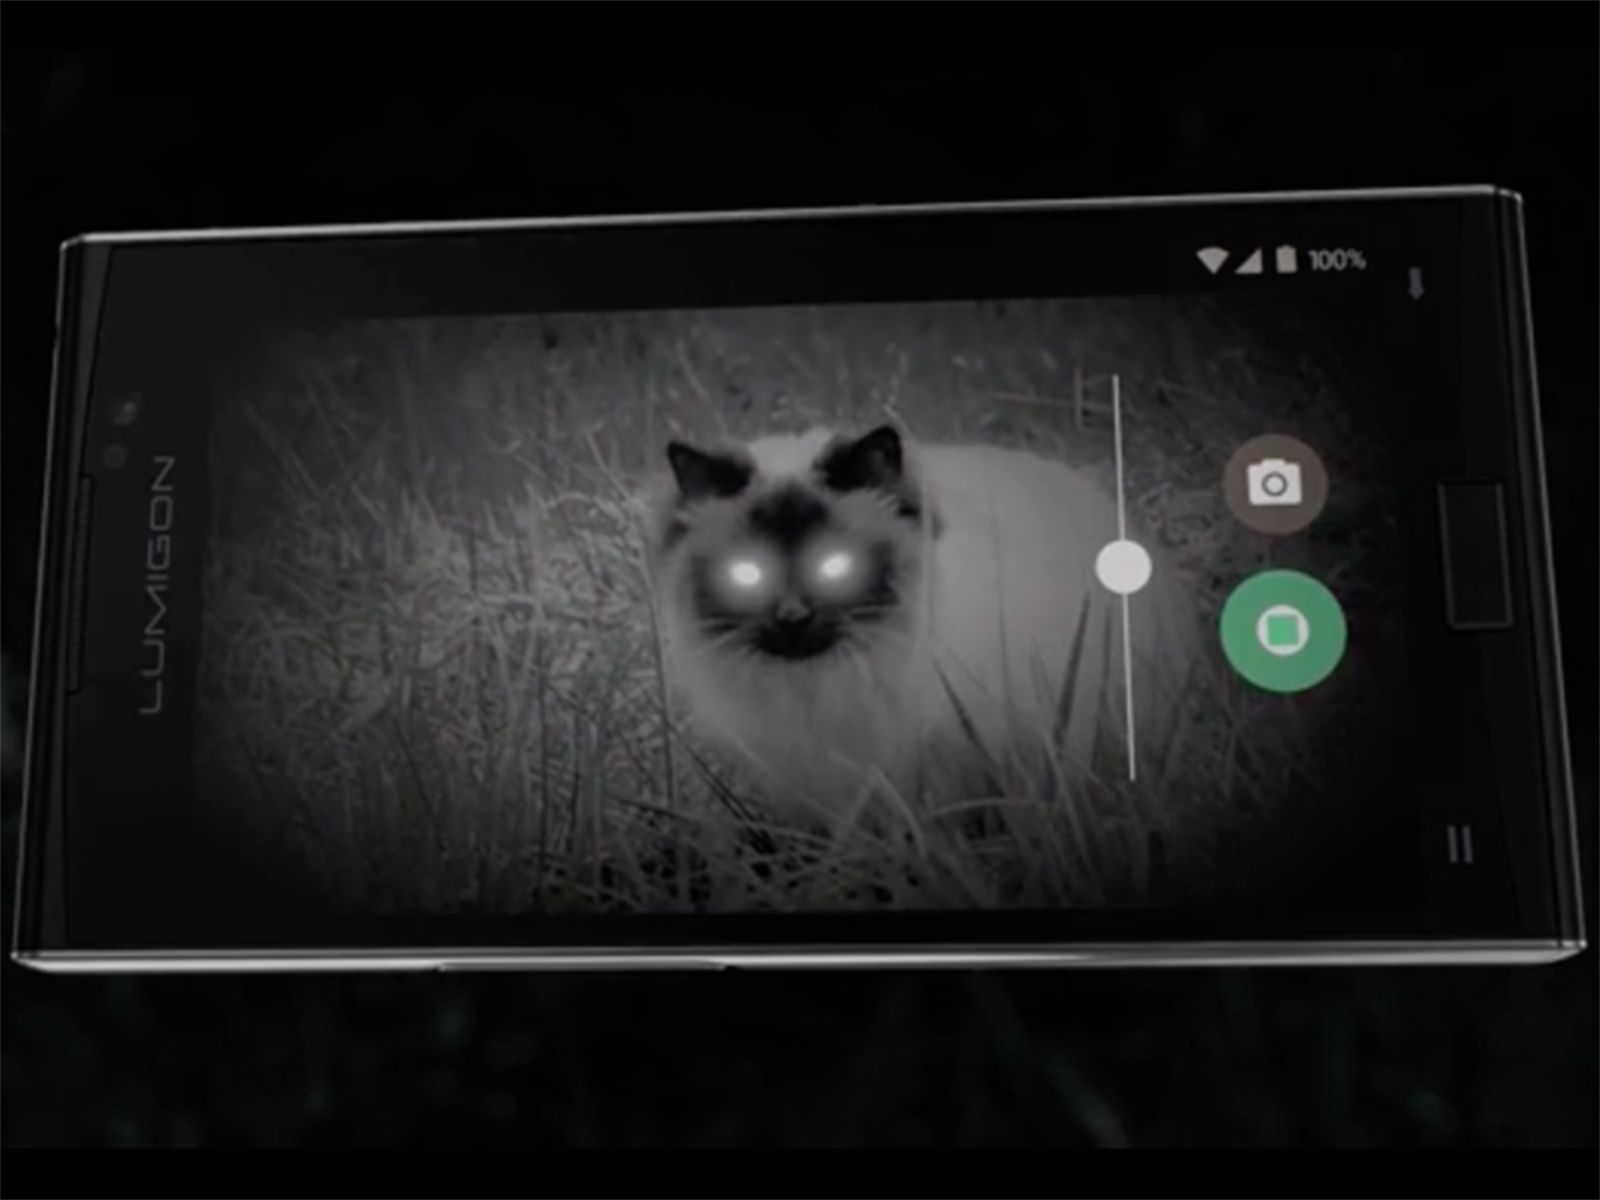 night vision in a military tough smartphone meet the gorgeous lumigon t3 image 2